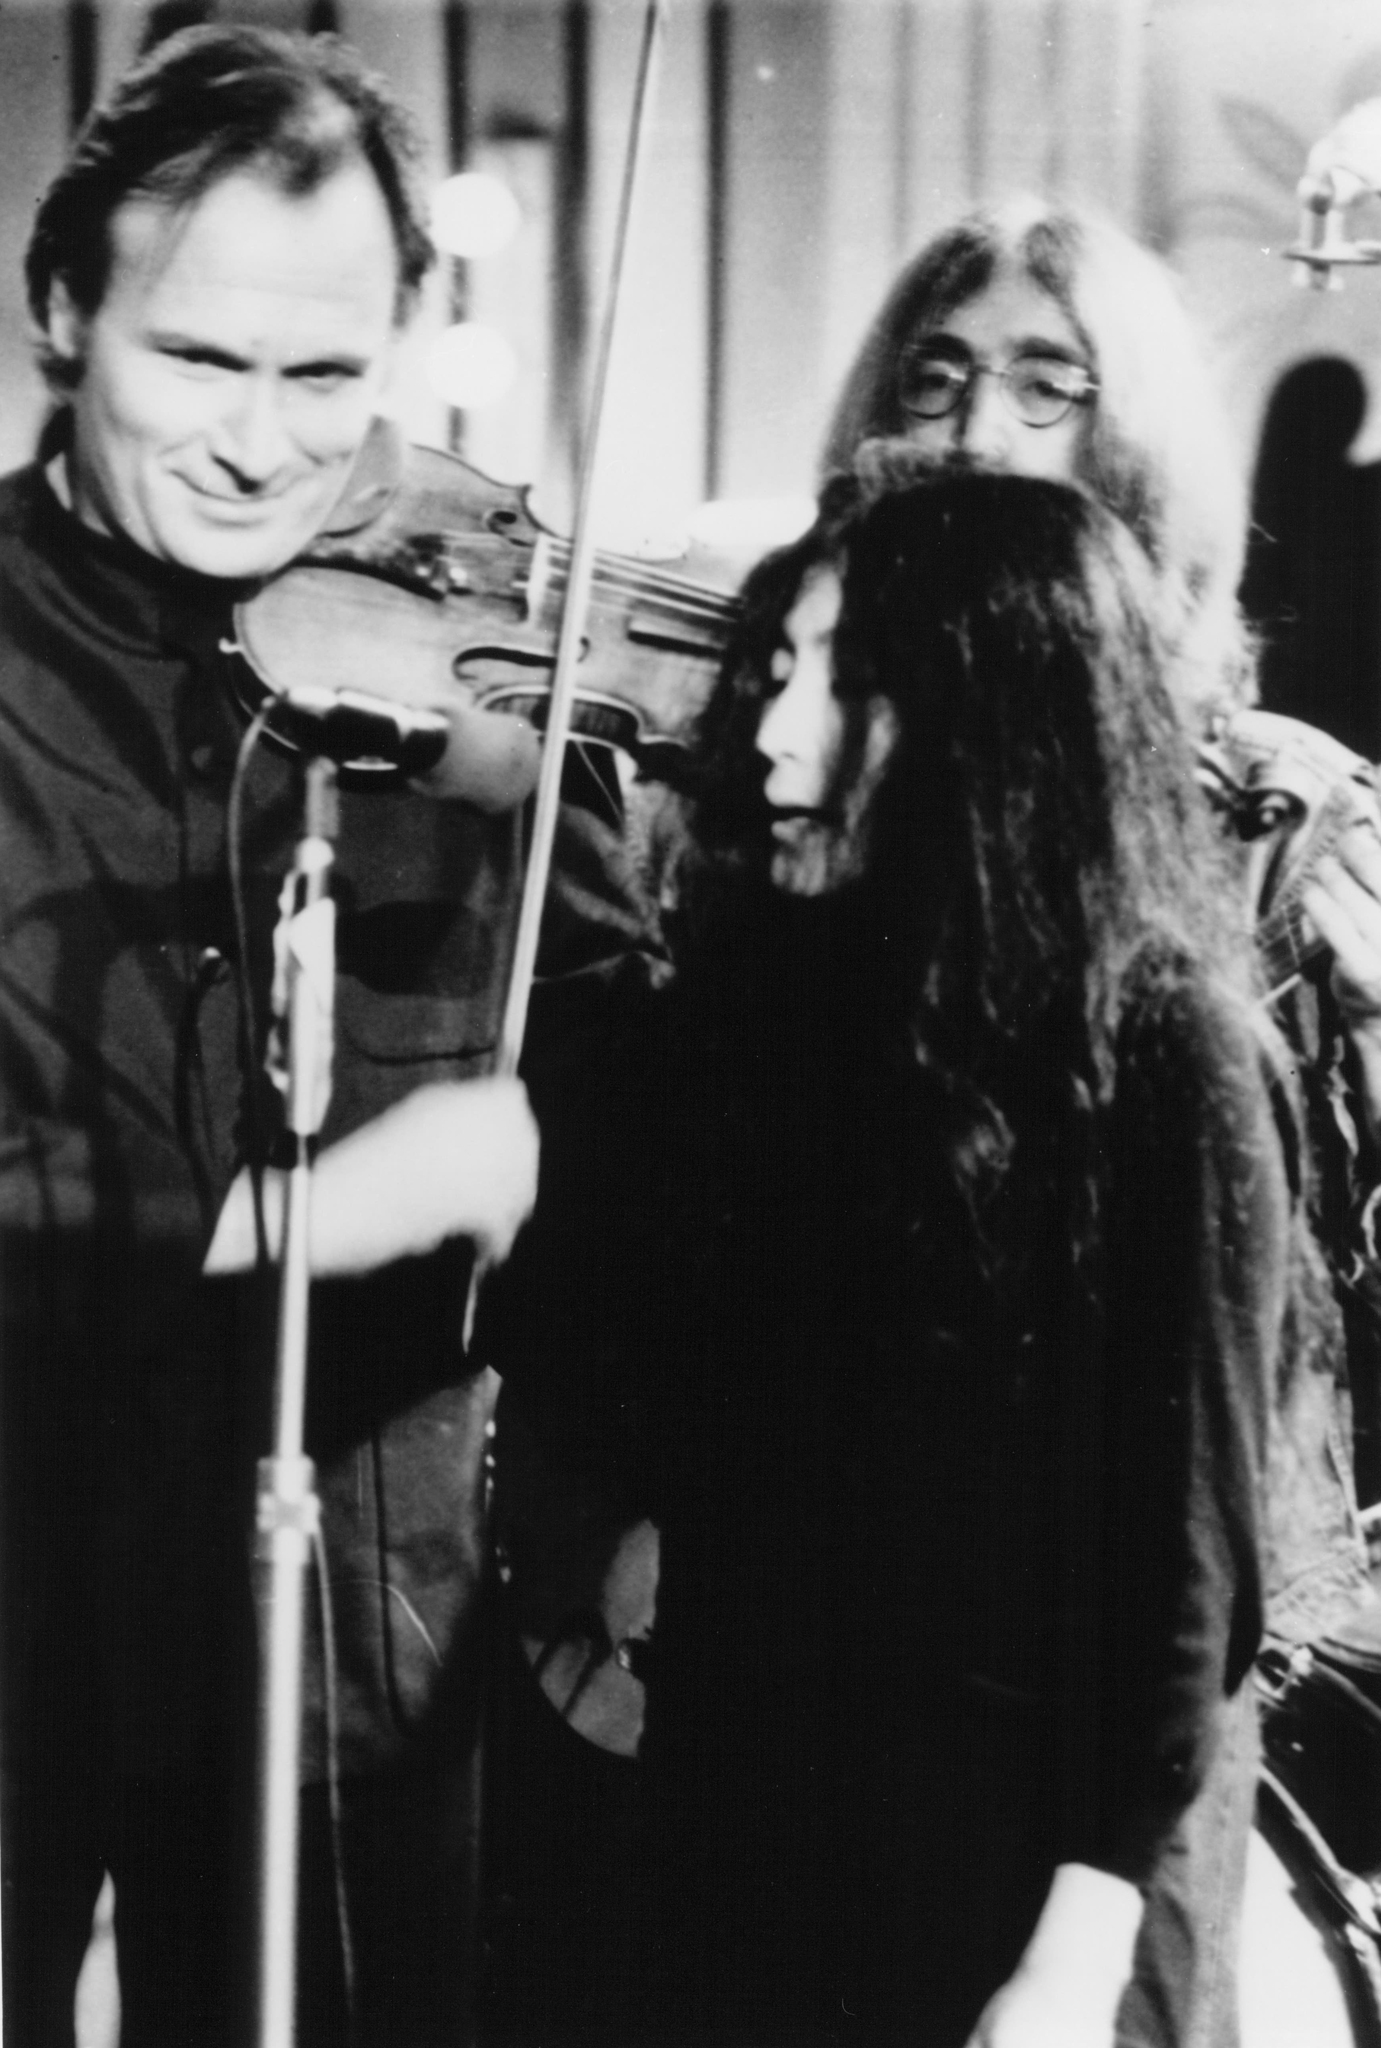 Still of John Lennon and Yoko Ono in The Rolling Stones Rock and Roll Circus (1996)